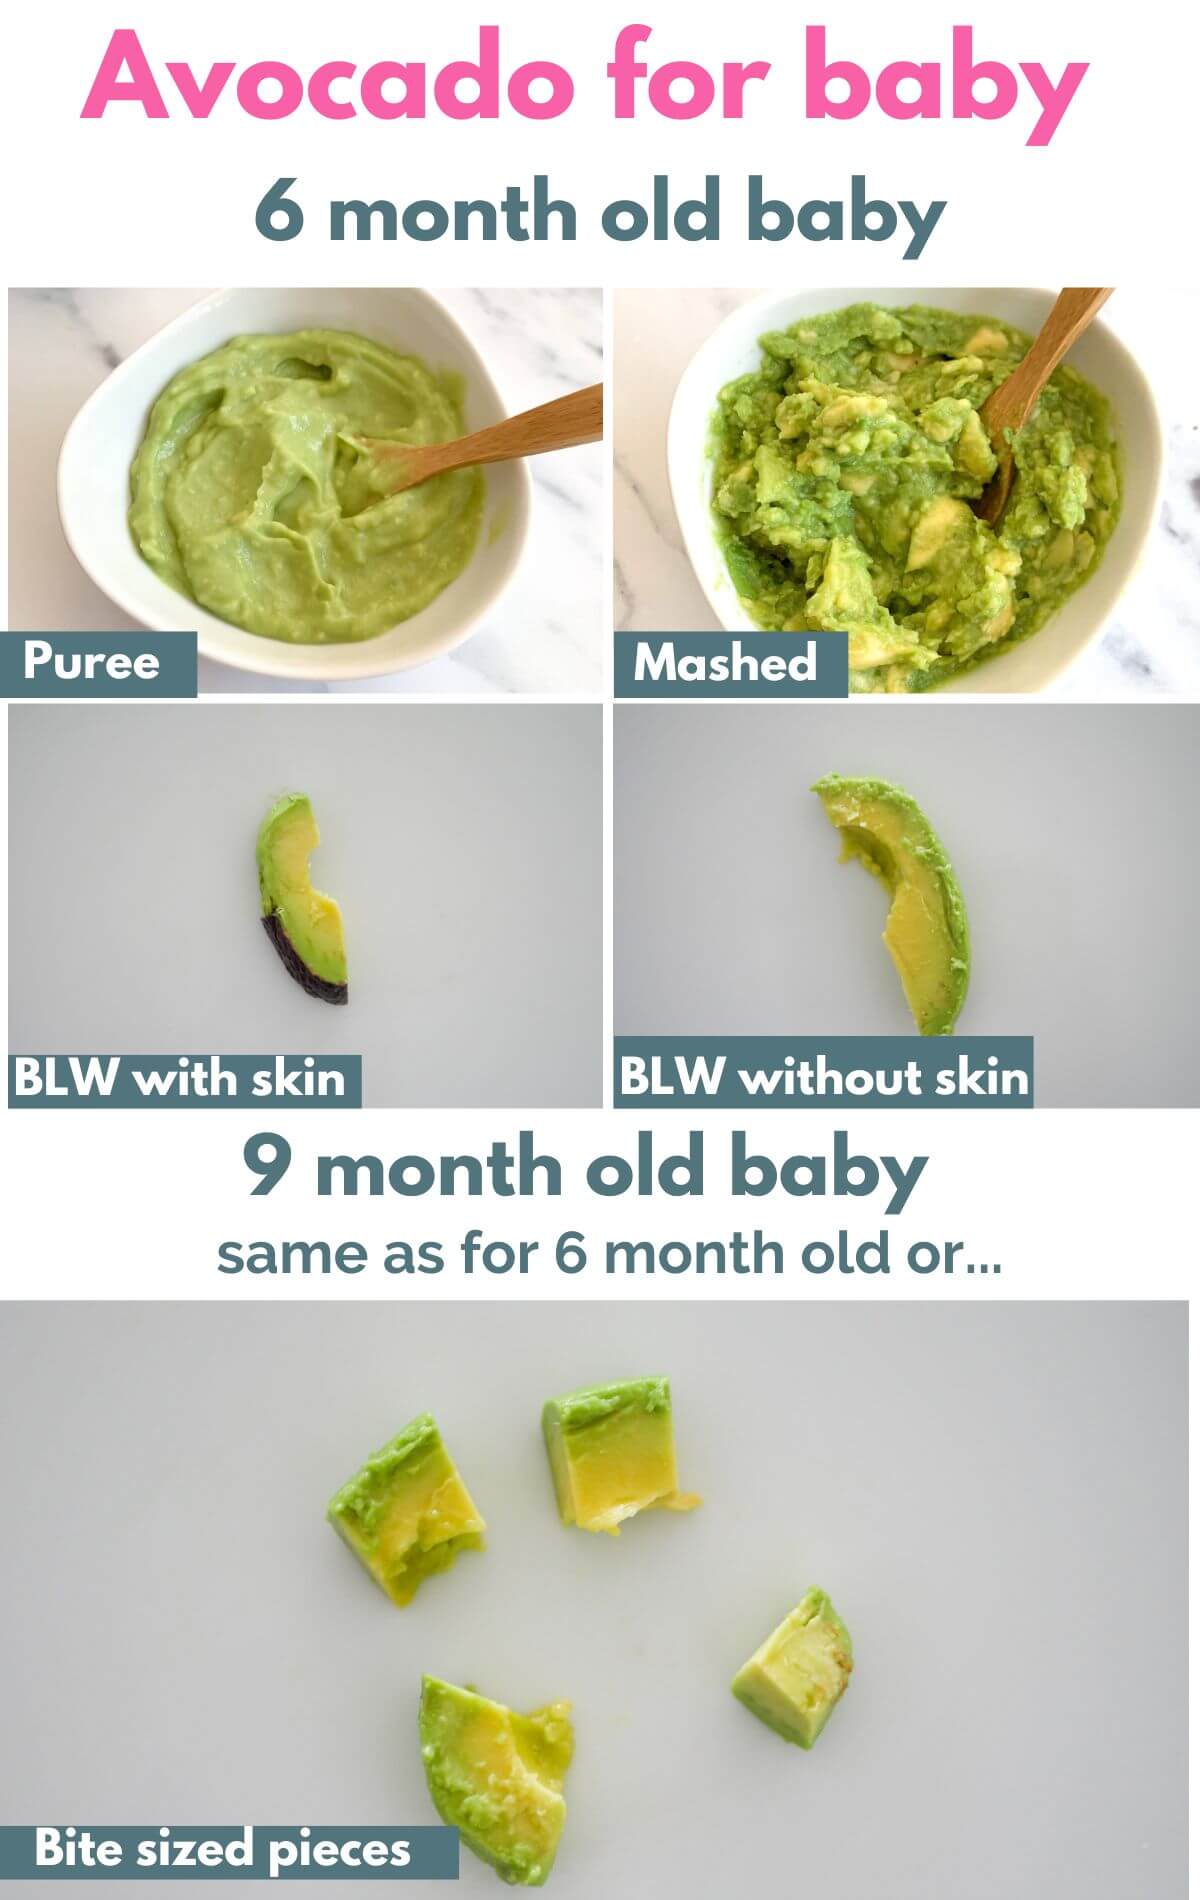 Collage with text showing how to serve avocado for baby for 6 month old baby and 9 month old baby